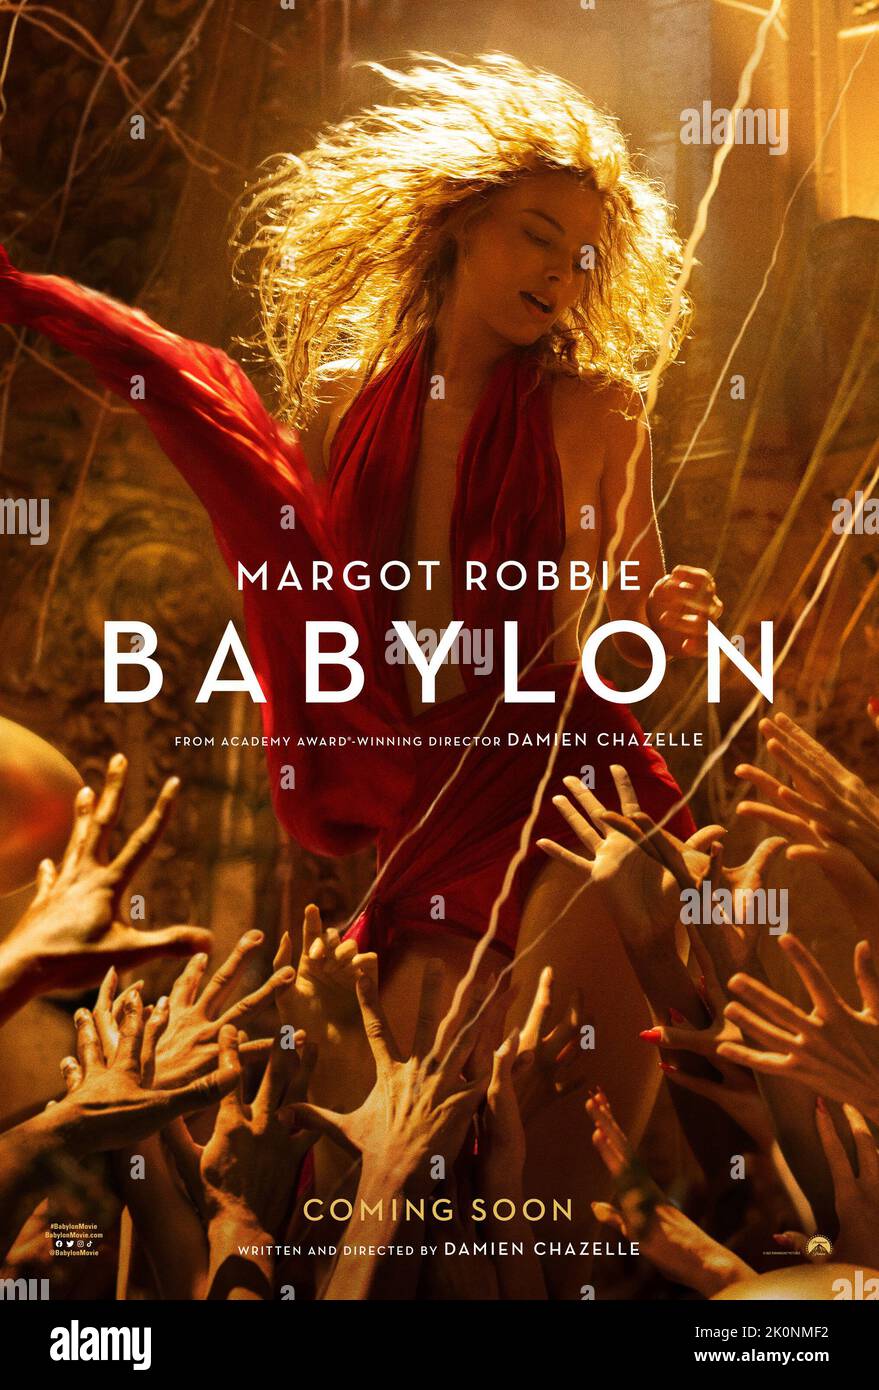 RELEASE DATE: January 6, 2023. TITLE: Babylon. STUDIO: Paramount Pictures. DIRECTOR: Damien Chazelle. PLOT: Set in Hollywood during the transition from silent films to talkies, focusing on a mixture of historical & fictional characters. STARRING: MARGOT ROBBIE as Nellie LaRoy. (Credit Image: © Paramount Pictures/Entertainment Pictures) Stock Photo